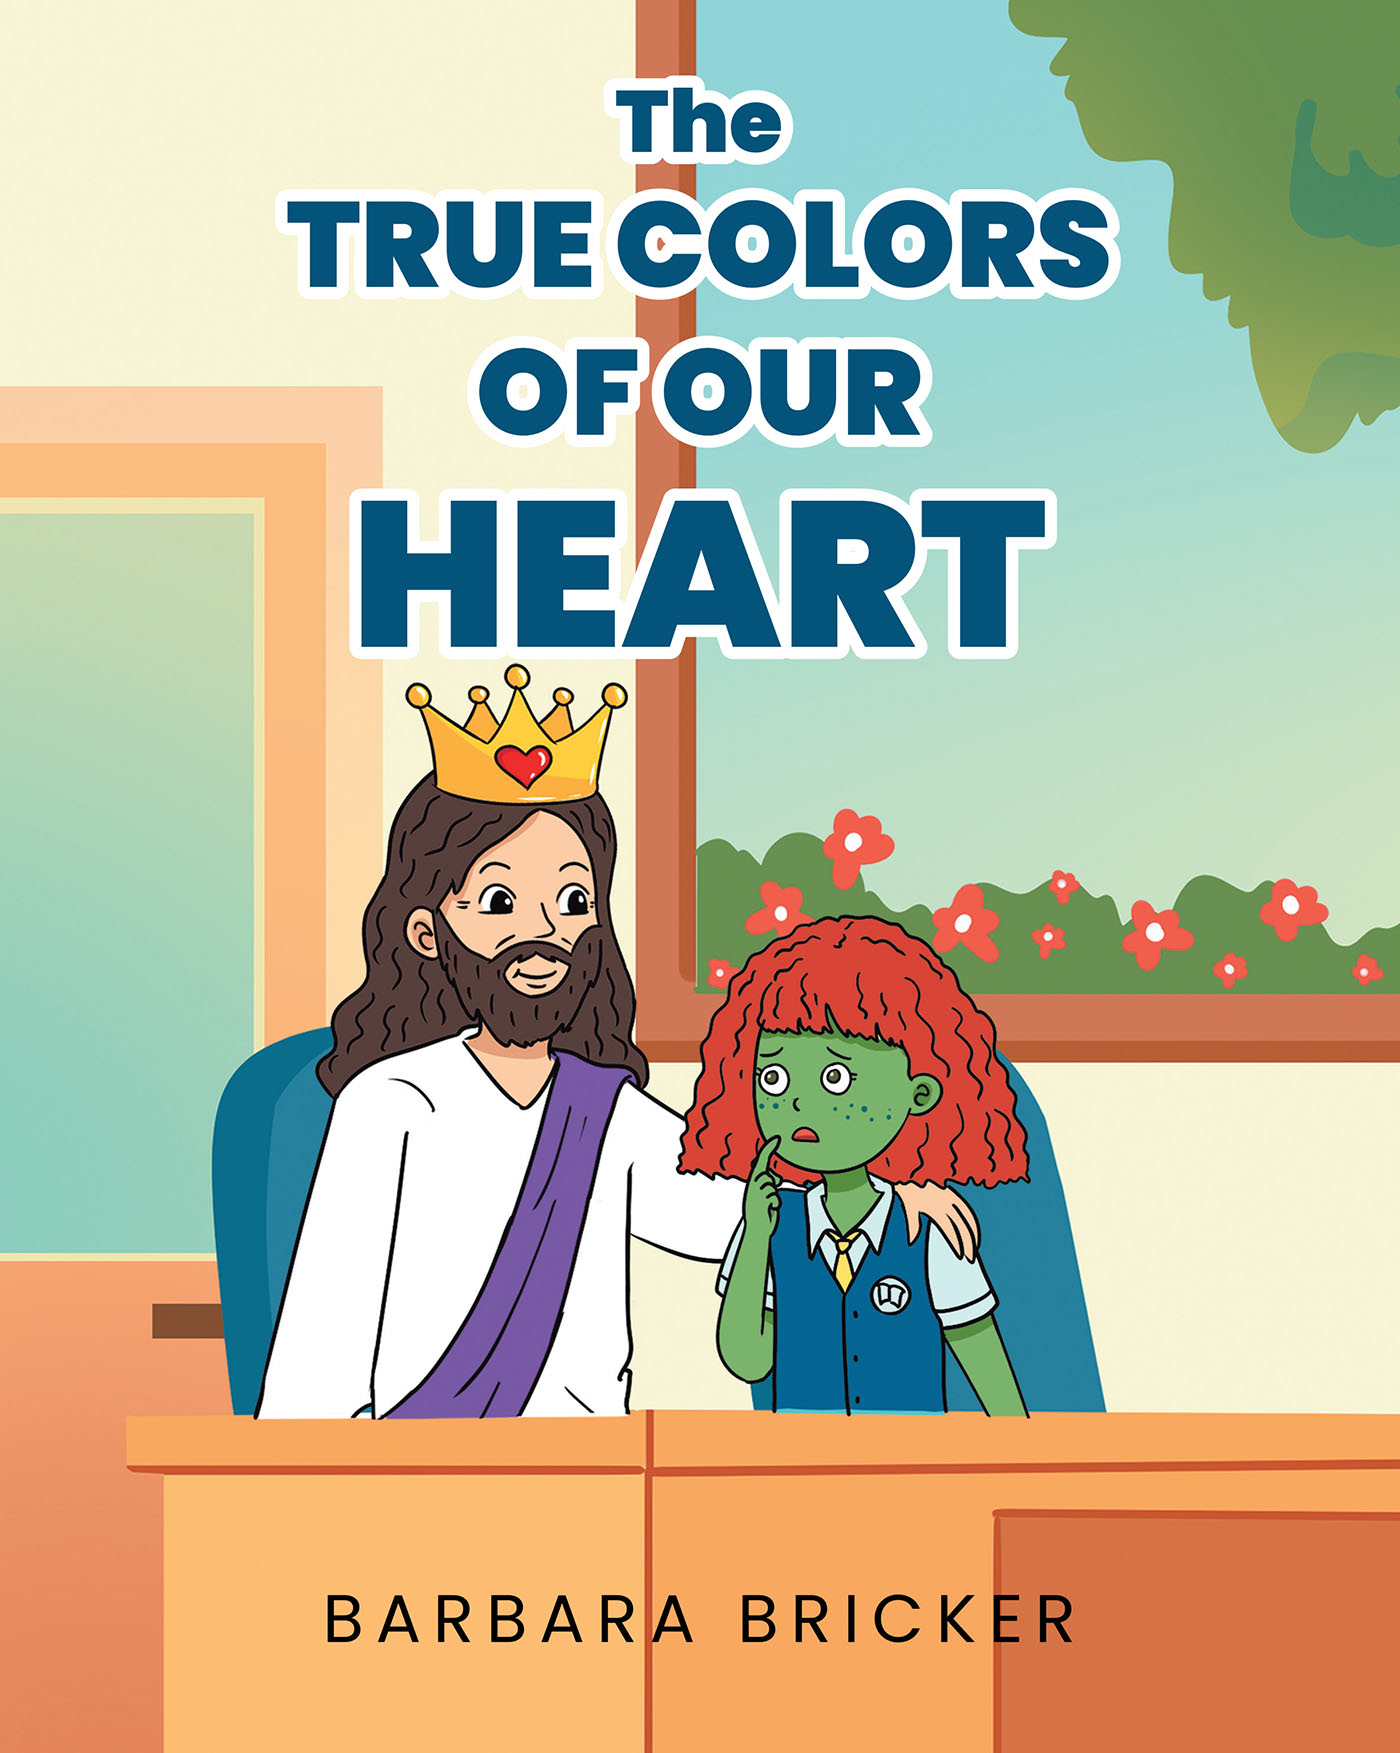 Barbara Bricker’s Newly Released “The True Colors Of Our Heart” is a Helpful Collection of Narratives That Illustrate Dangerous, Negative Feelings